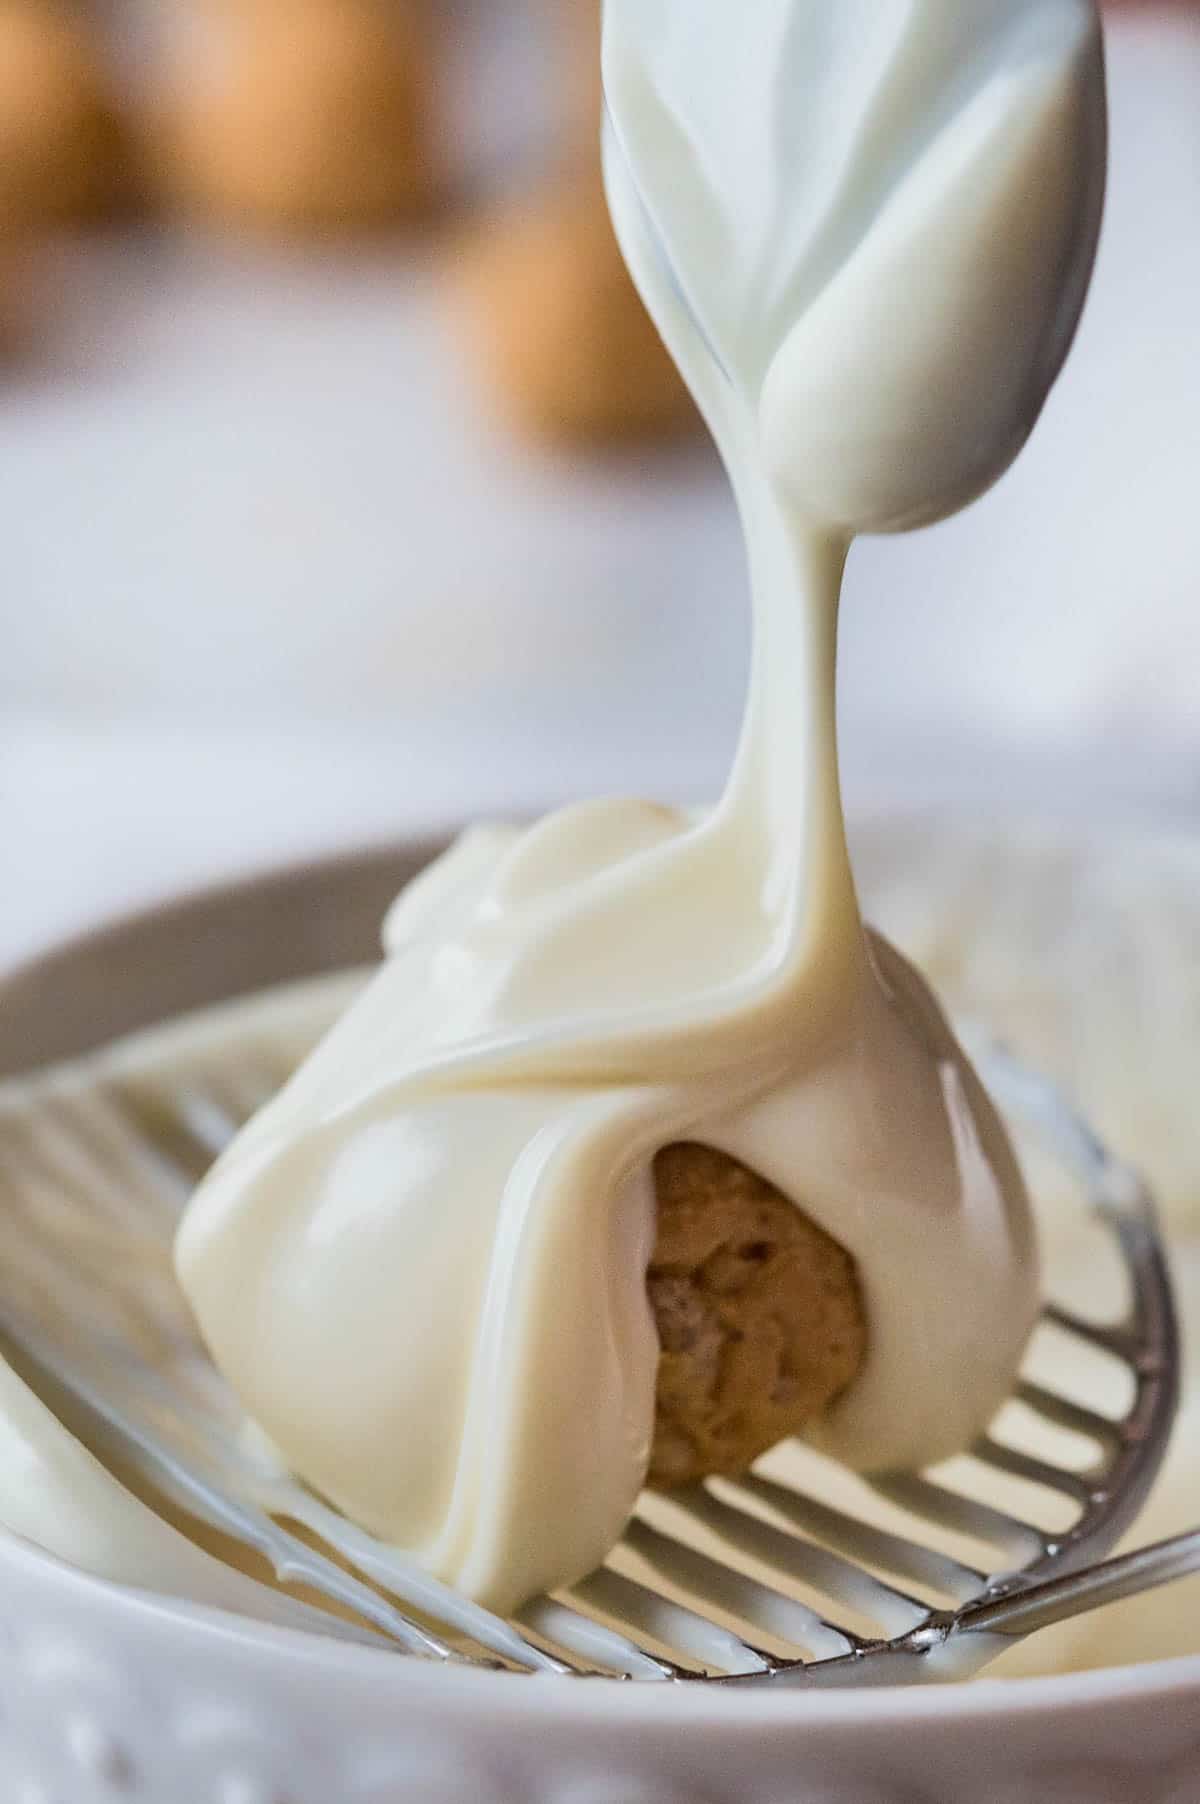 drizzling white chocolate over the peanut butter balls.